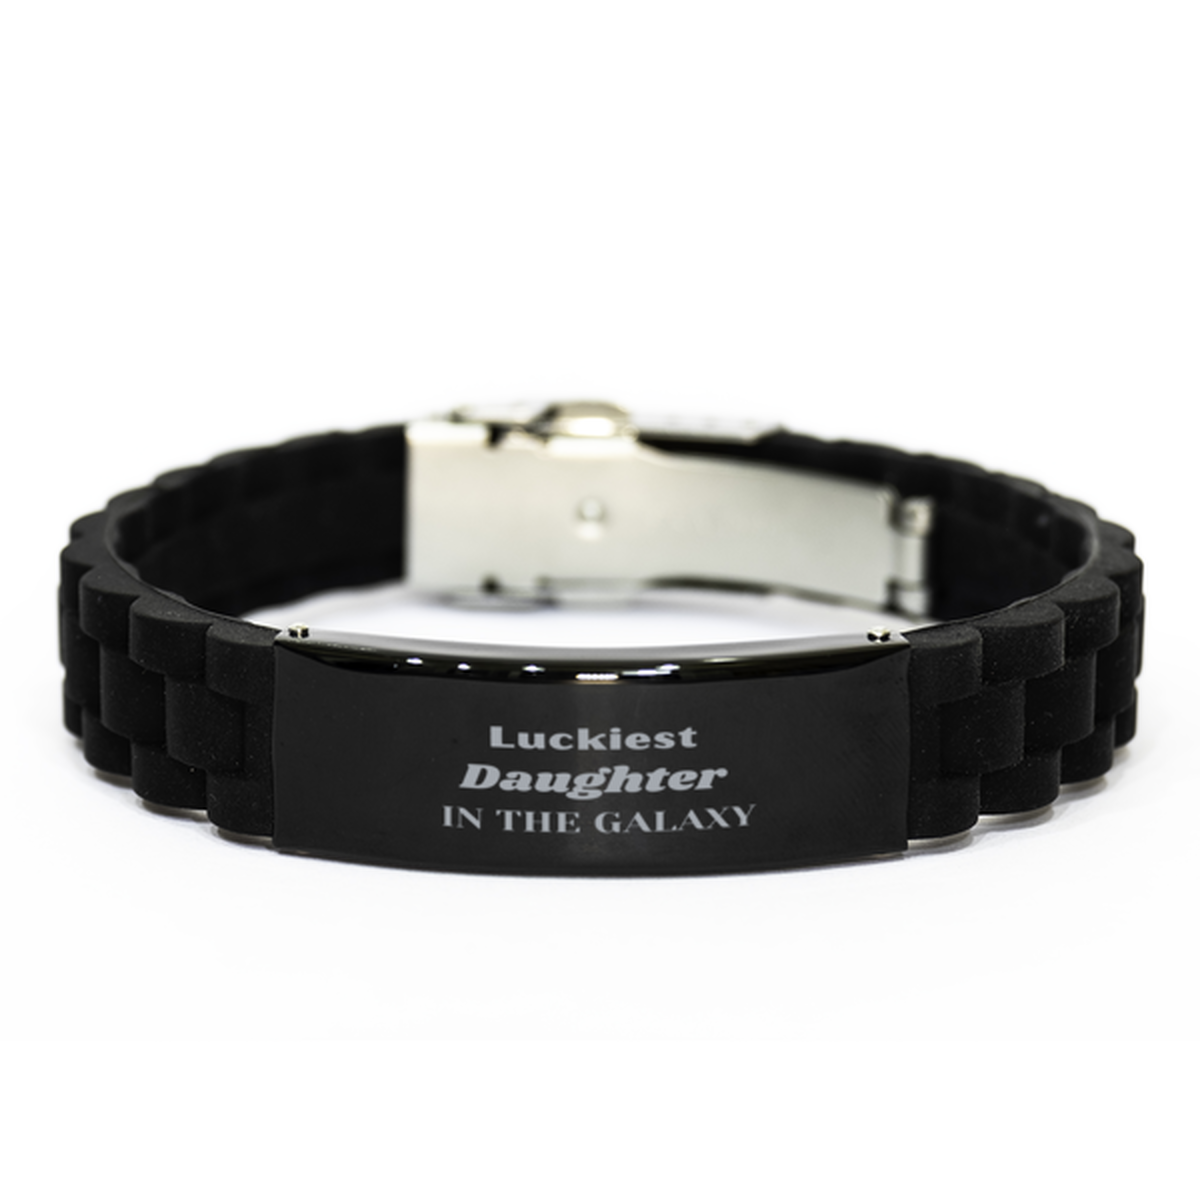 Luckiest Daughter in the Galaxy, To My Daughter Engraved Gifts, Christmas Daughter Black Glidelock Clasp Bracelet Gifts, X-mas Birthday Unique Gifts For Daughter Men Women